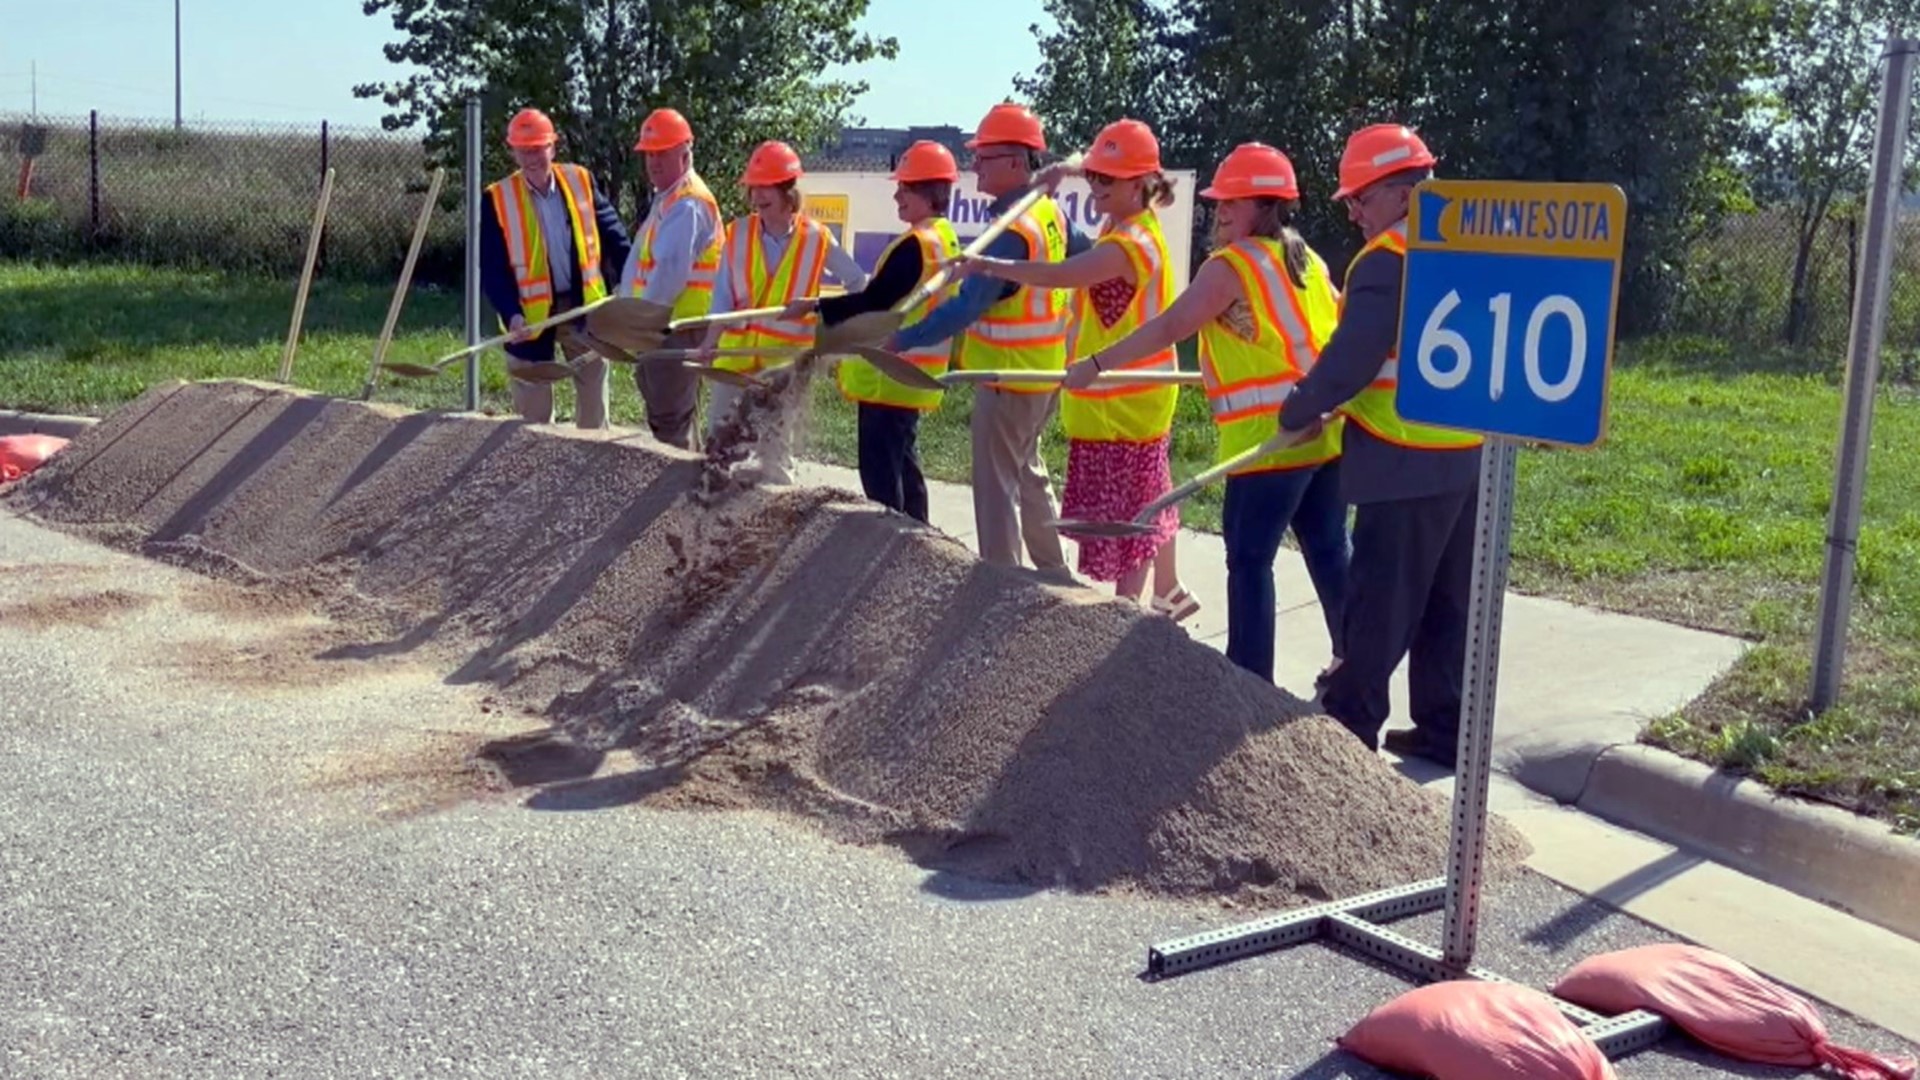 A bipartisan group of local, state, and federal elected leaders gathered in Maple Grove Tuesday to formally break ground on the MN Highway 610 extension project.